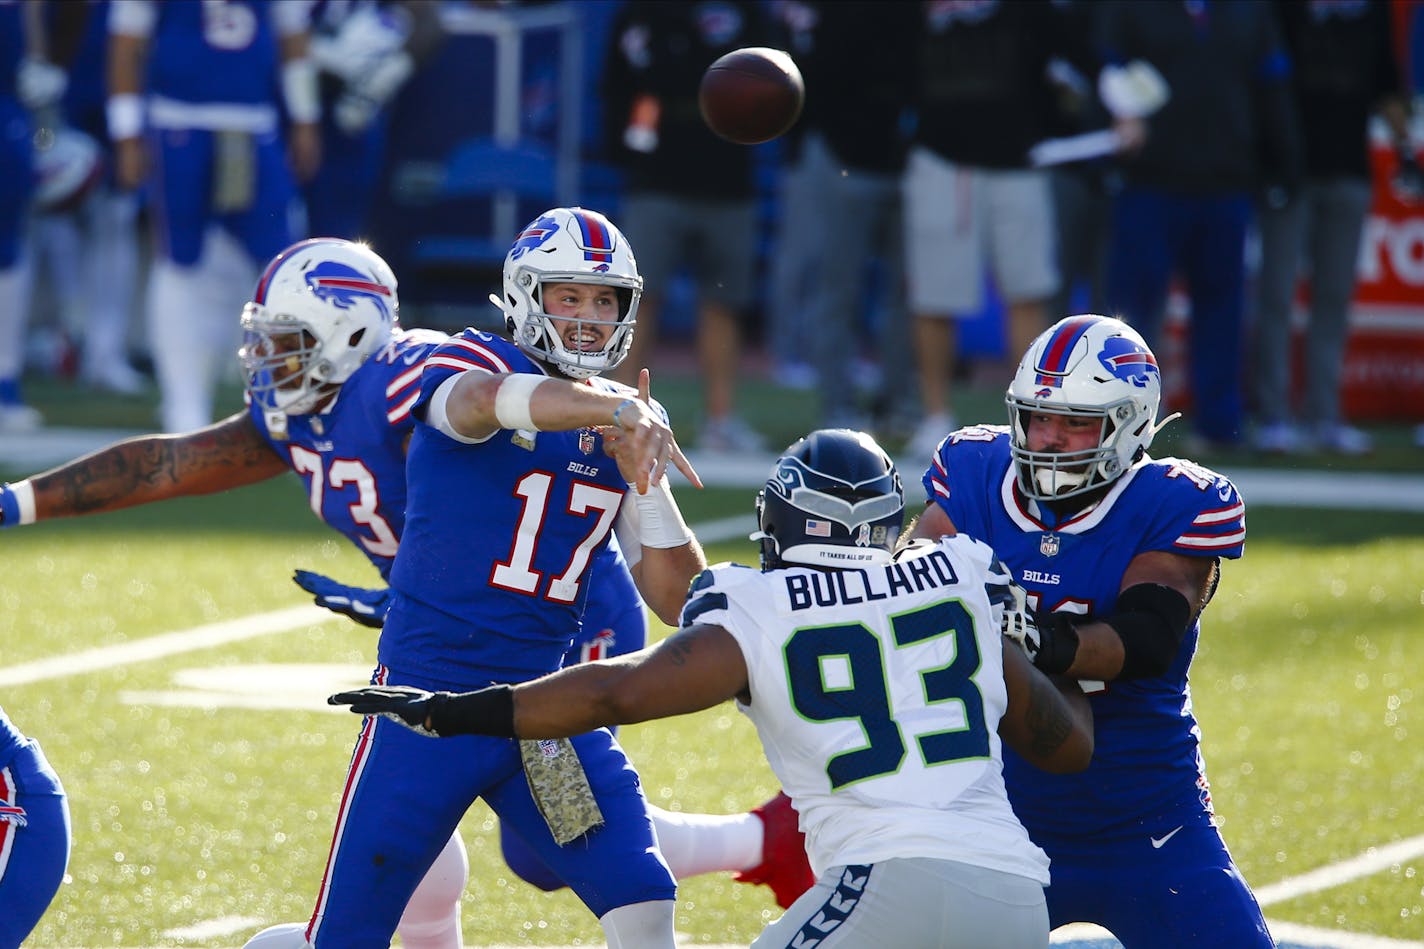 Buffalo Bills quarterback Josh Allen (17) throws a pass during the first half of an NFL football game against the Seattle Seahawks Sunday, Nov. 8, 2020, in Orchard Park, N.Y. (AP Photo/John Munson)